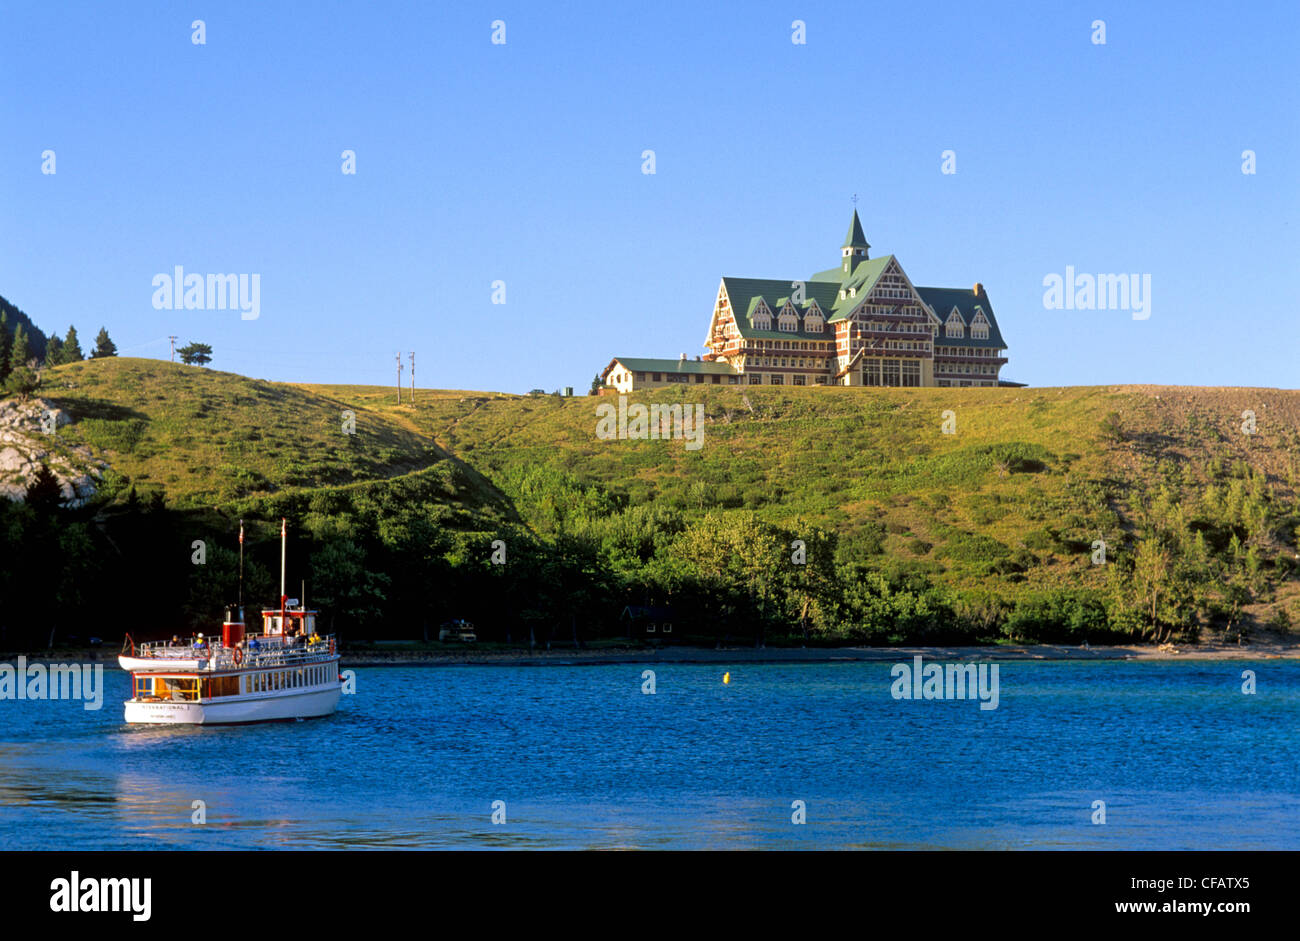 Tour boat in front of Prince of Wales Hotel, Waterton National Park, Alberta, Canada. Stock Photo